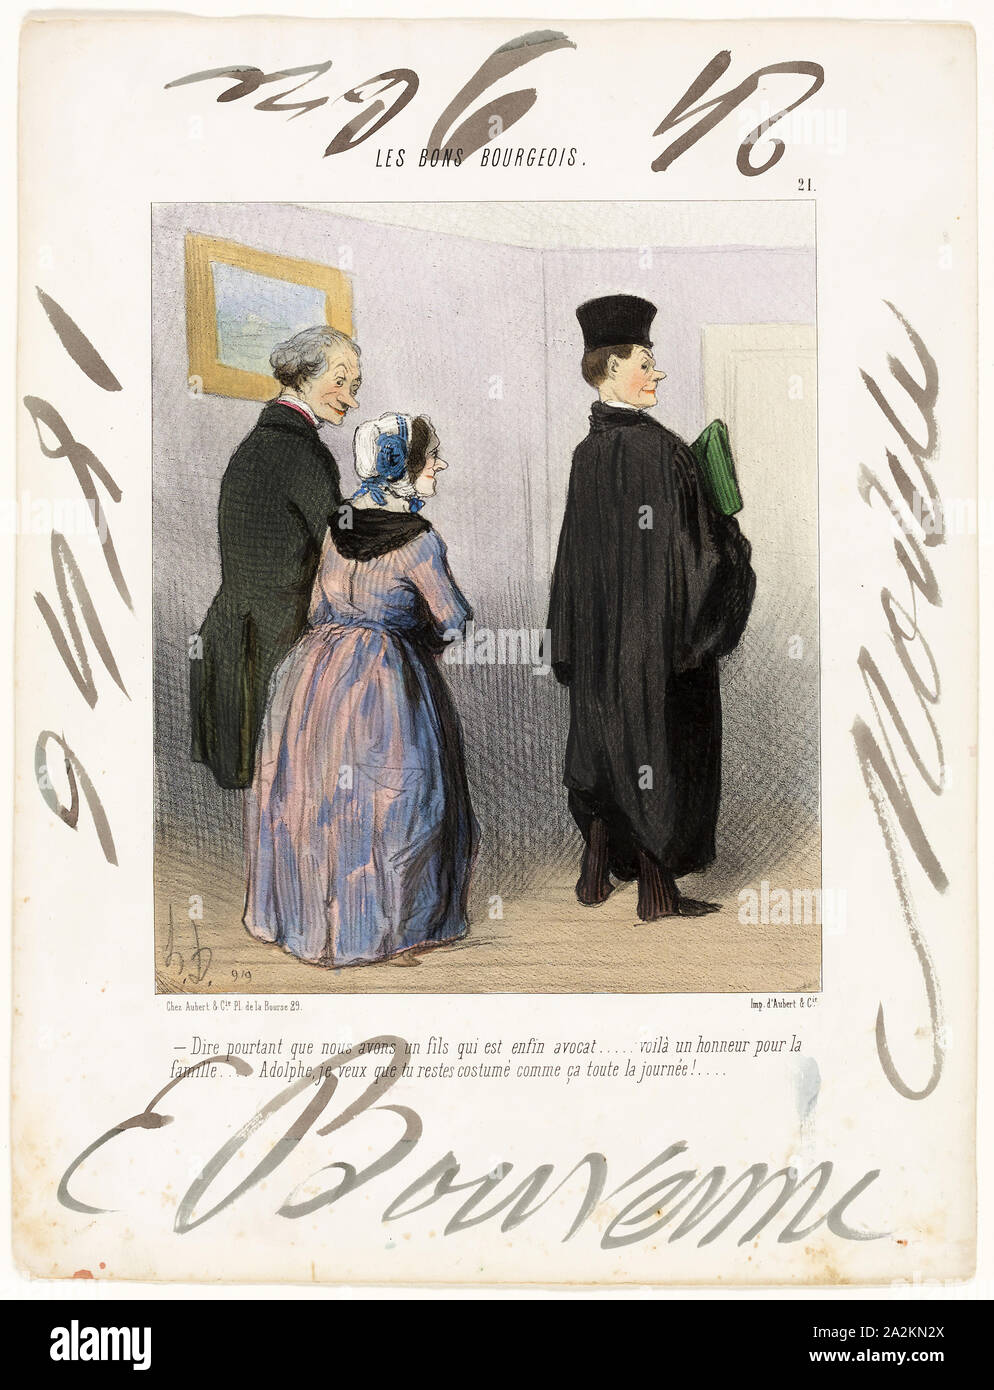 Isn’t it marvellous to have a son who is a lawyer… what an honour for the family… Adolph, I want you to remain dressed like that all day long!…, plate 21 from Les Bons Bourgeois, 1846, Honoré Victorin Daumier (French, 1808-1879), model by Édouard Bouvenne (French, active 19th century), France, Lithograph, with watercolor, heightened with gum arabic on ivory wove paper, 250 × 198 mm (image), 359 × 273 mm (sheet Stock Photo